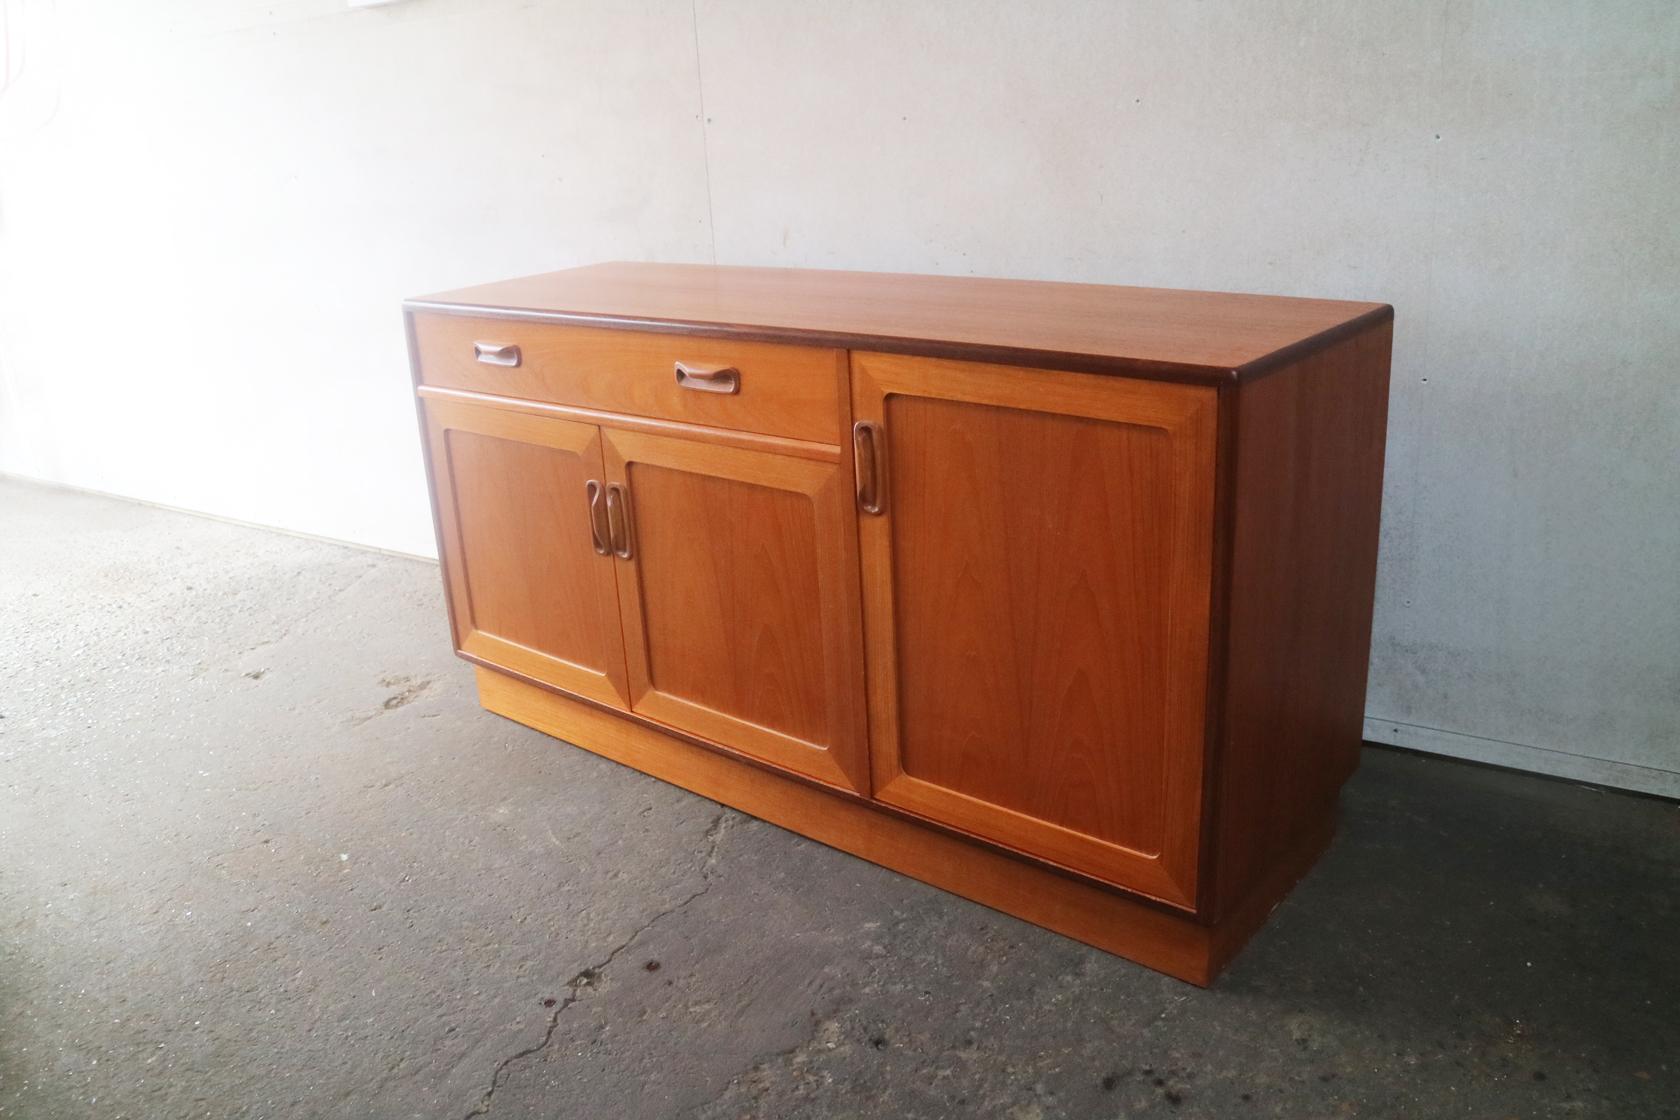 A lovely example of the G Plan Fresco range. Attractive wood grain throughout with distinctive recessed handles. In superb condition.

Country of origin: UK
Date of manufacture: 1970s.
Material: teak
Size: width 139cm x height 71cm x depth